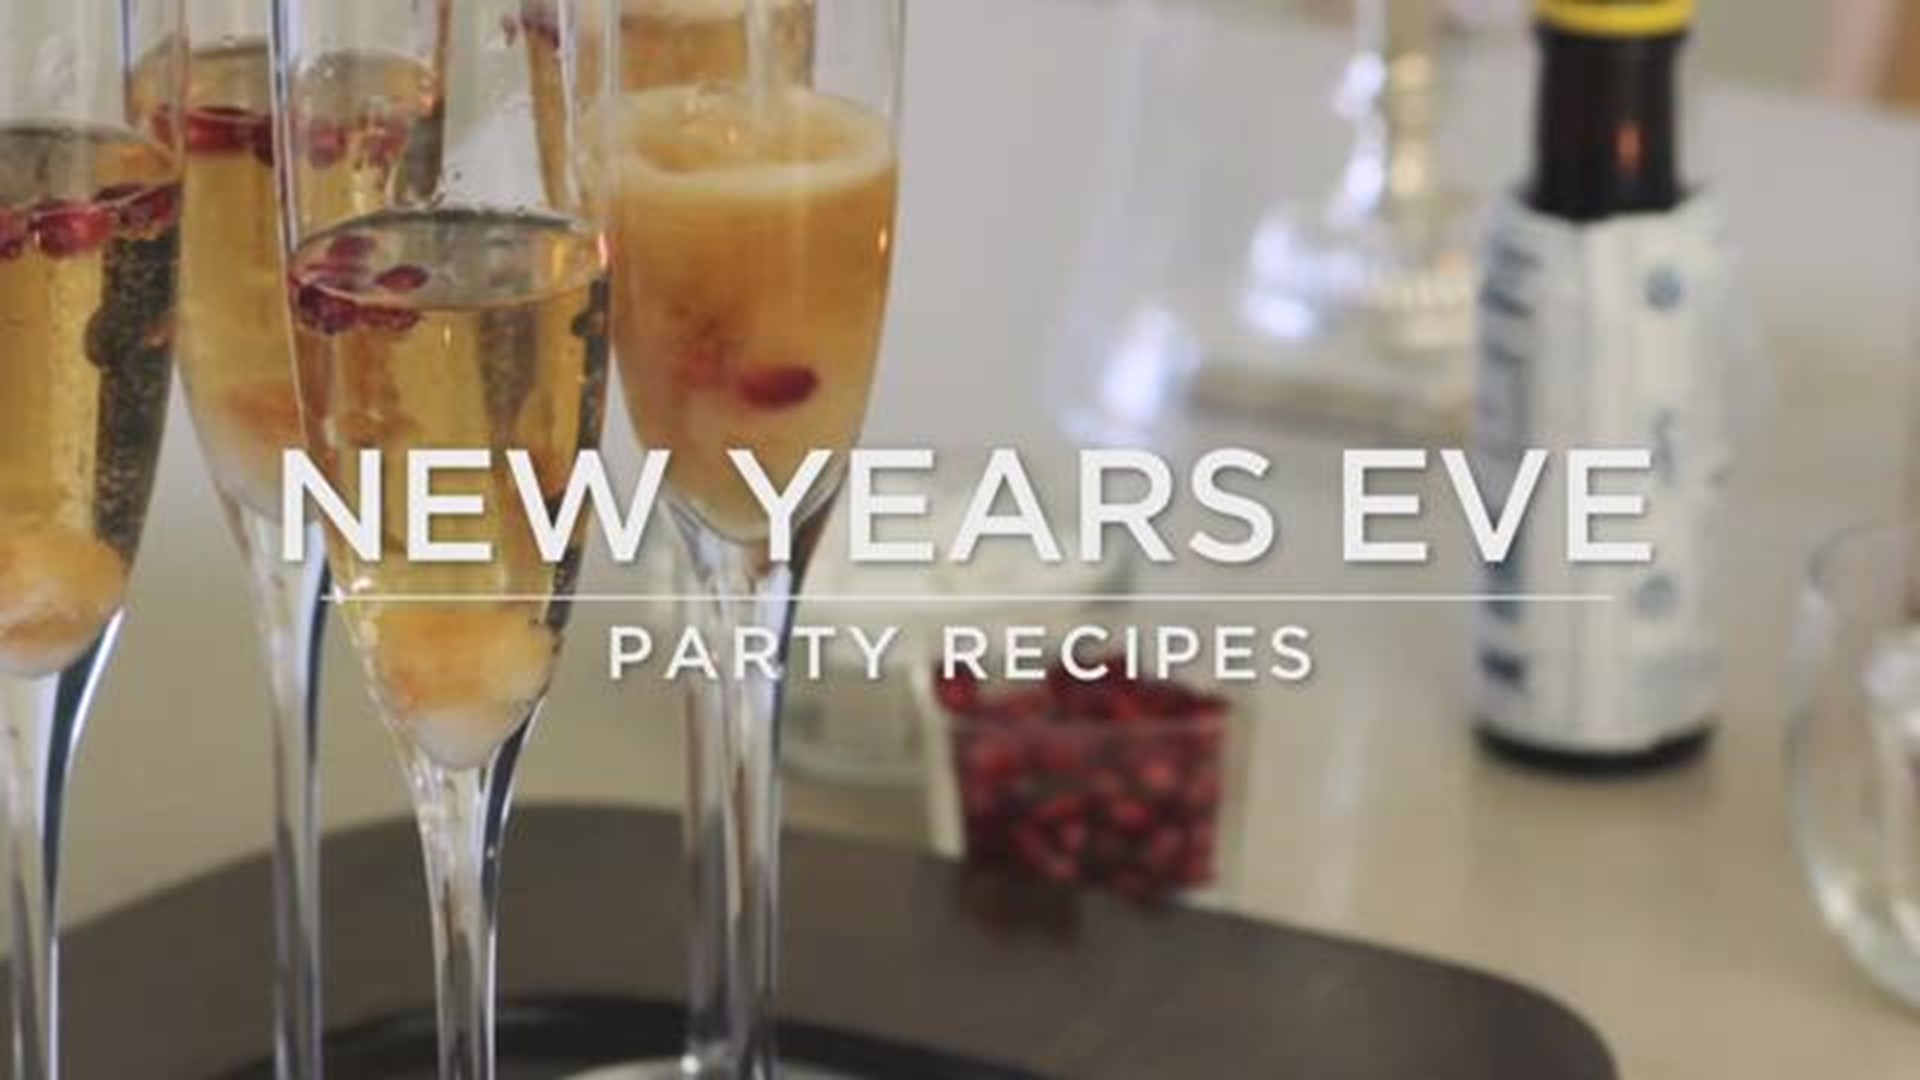 6 New Years Eve party recipes your guests will love!
___

RECIPES: http://bit.ly/2j0urtz